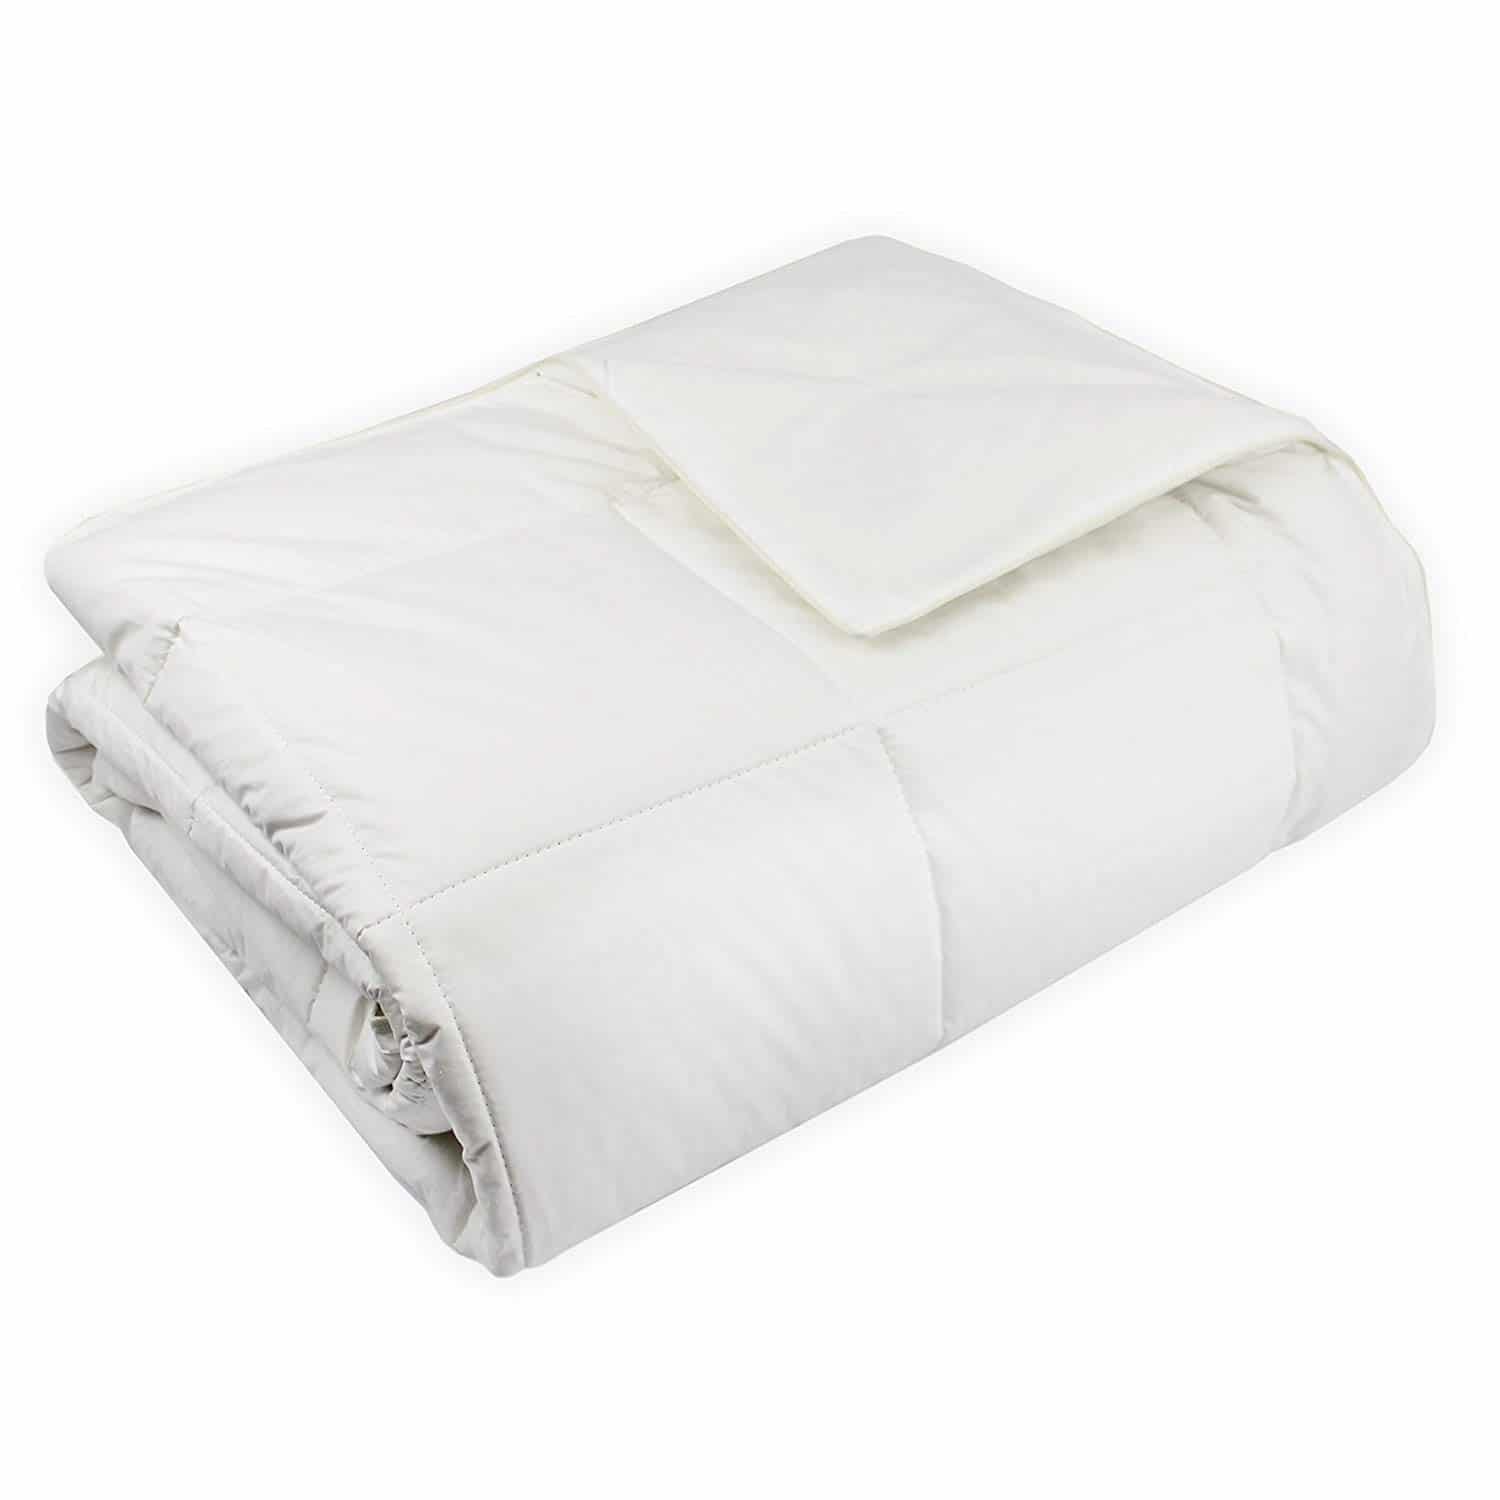 Century Home Natural Home Woolmark Certified Pure Wool Filled Comforter, Twin